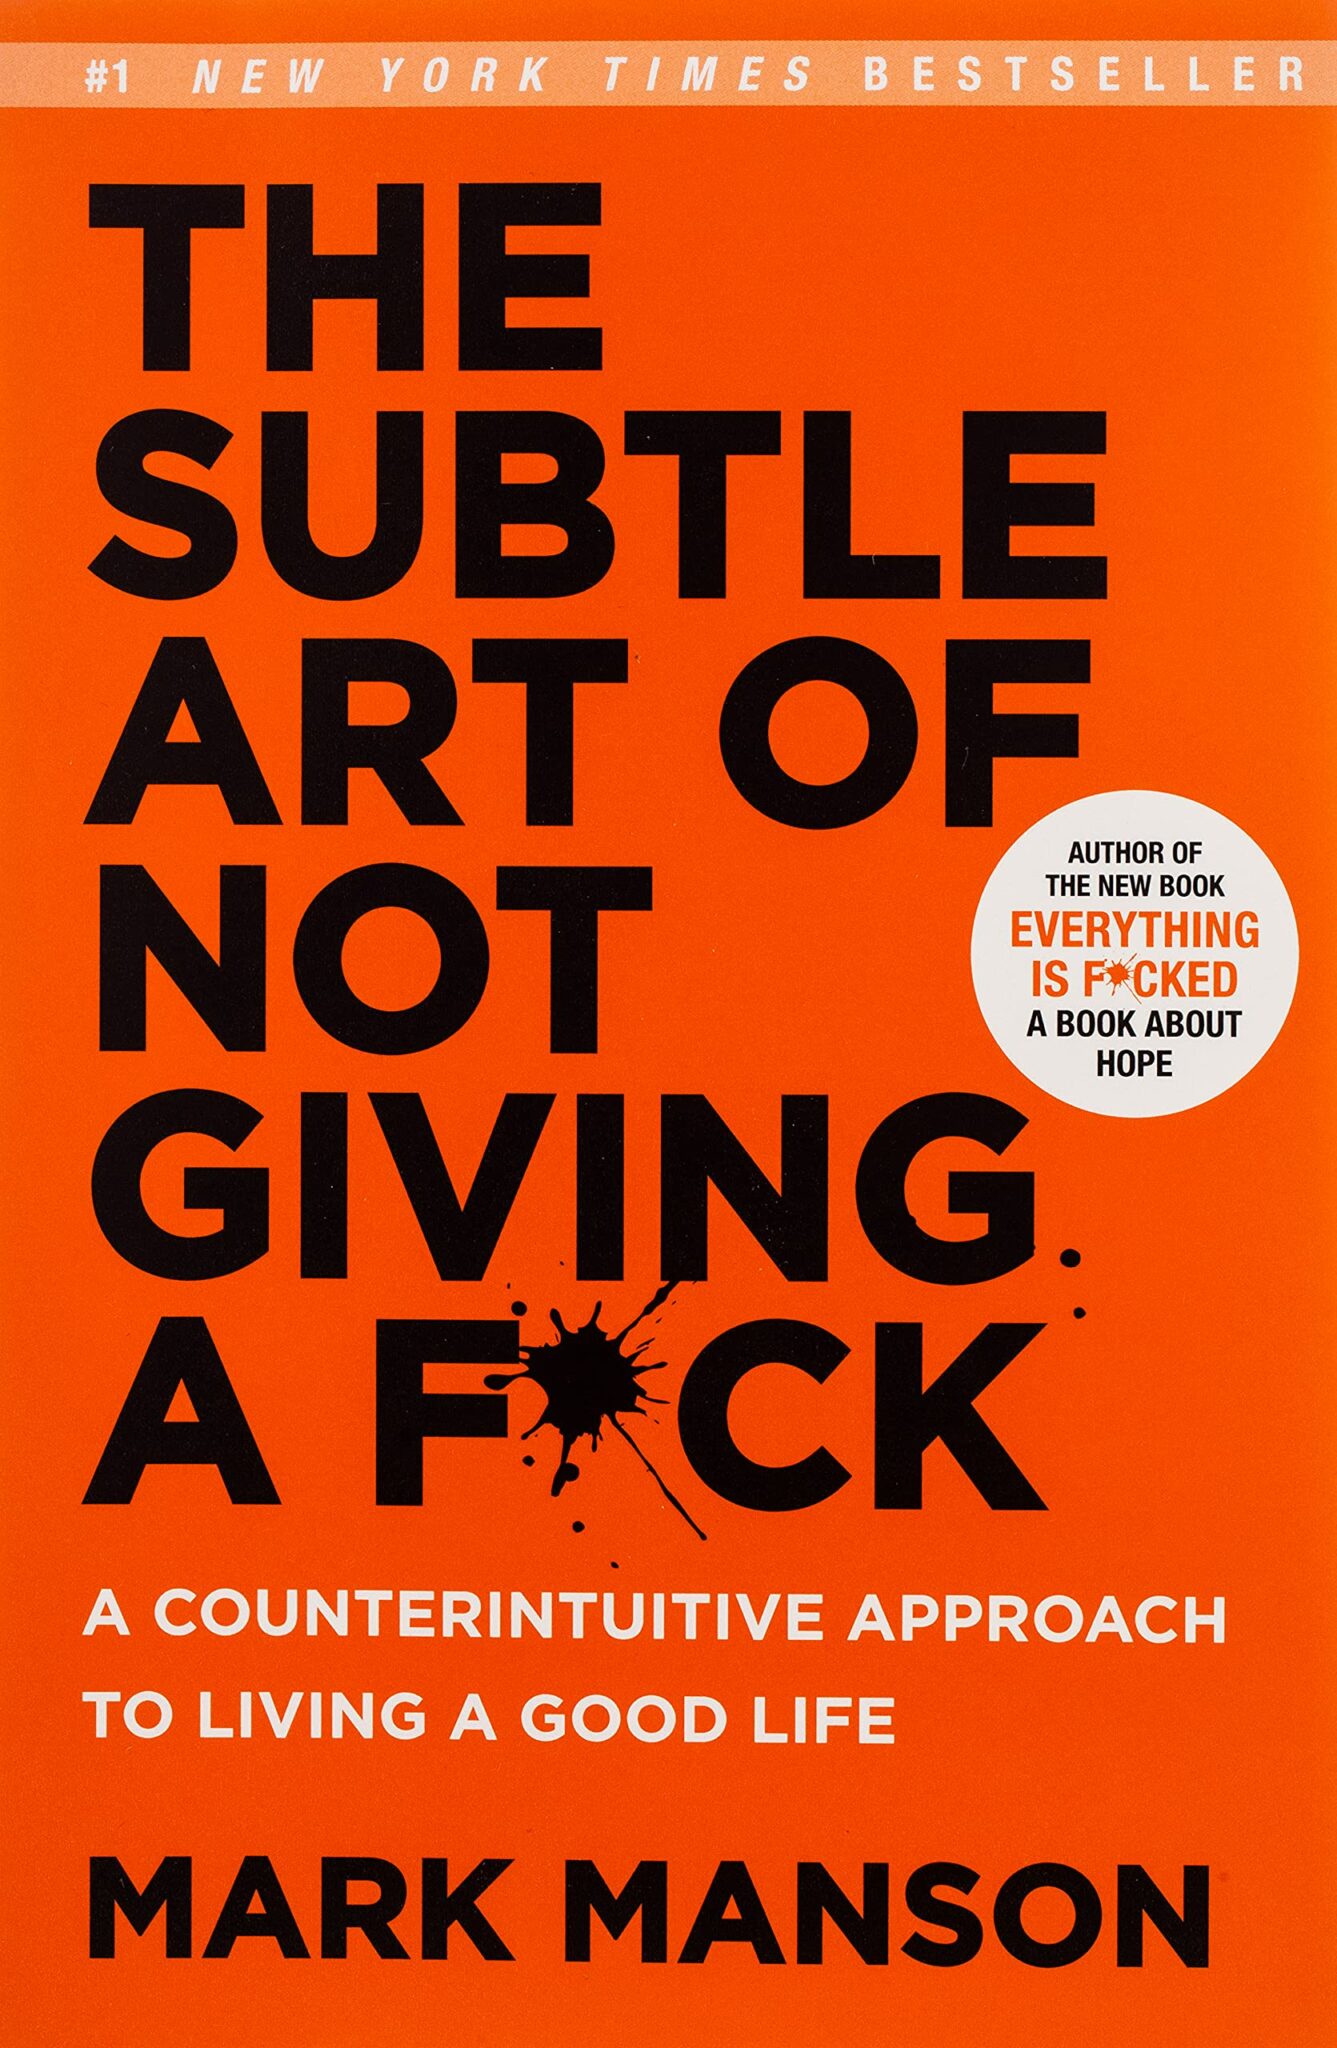 The subtle art of not giving a F*ck